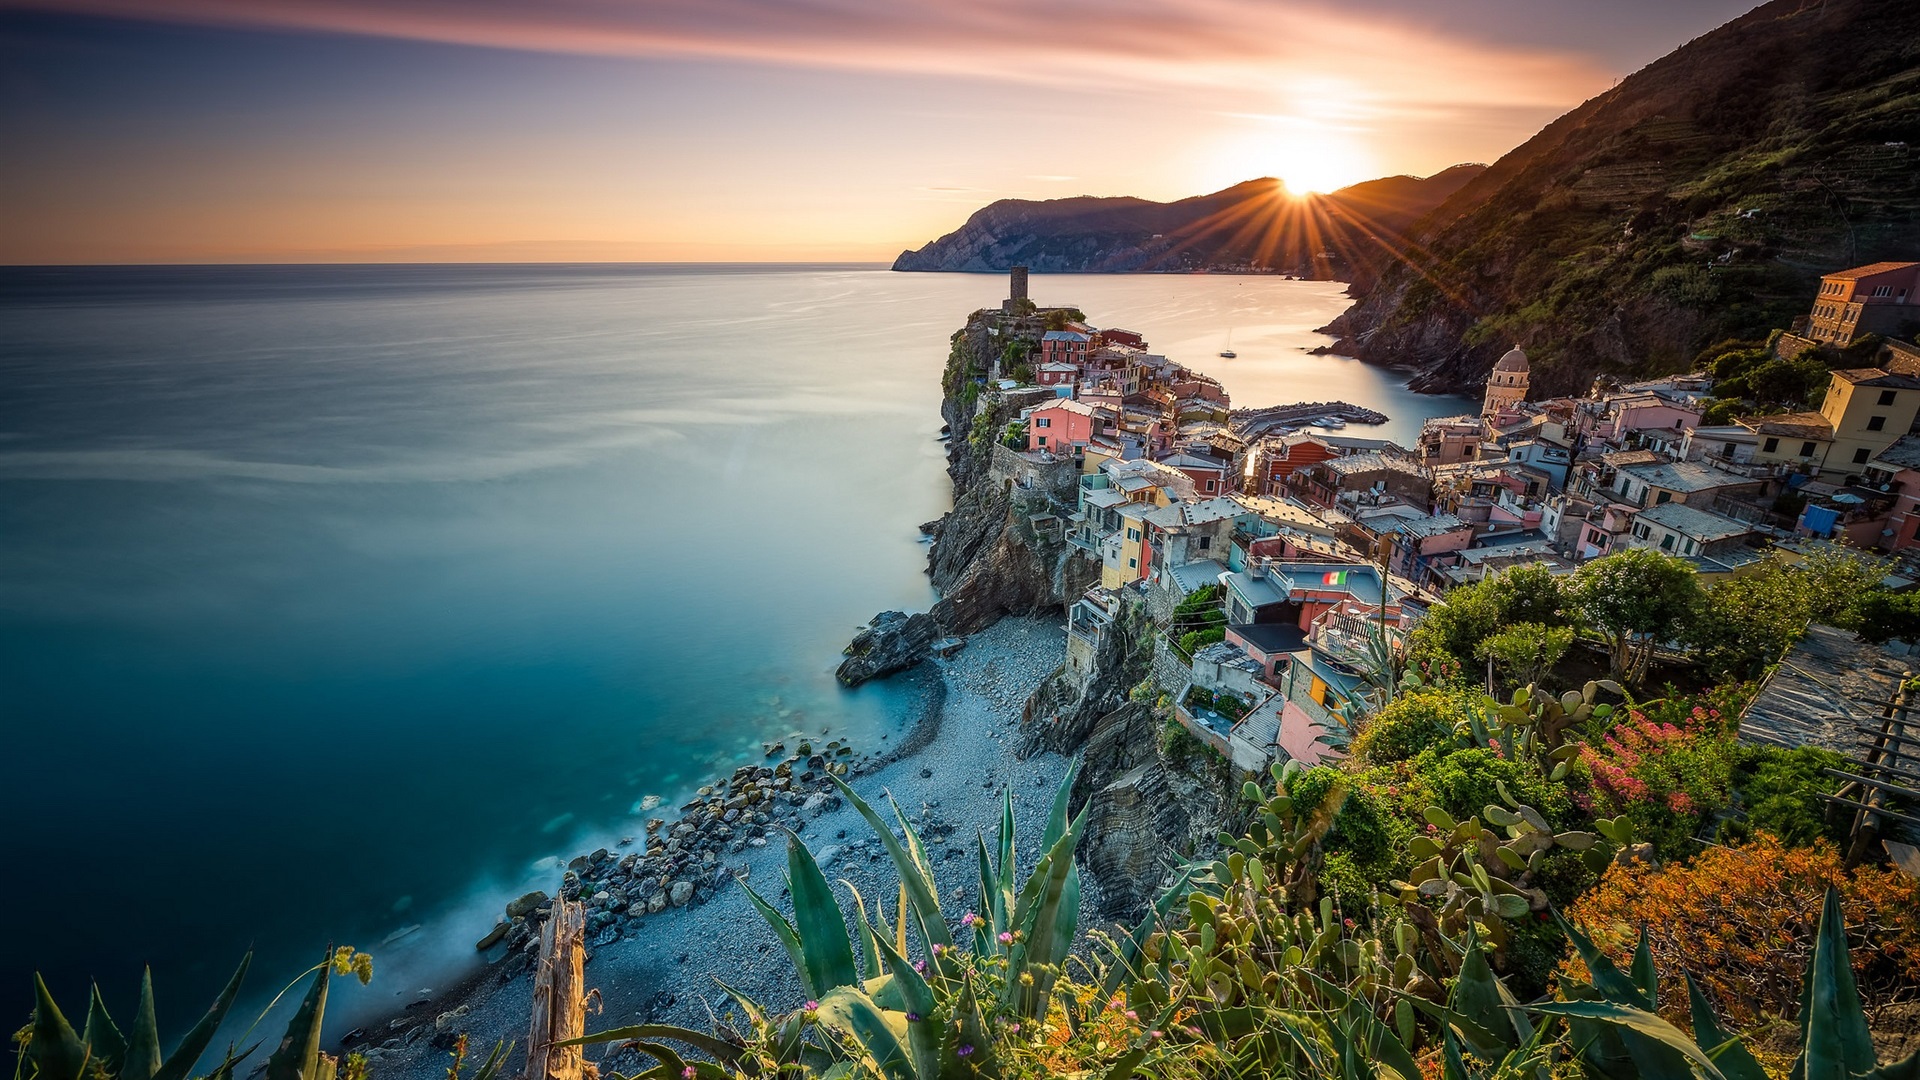 General 1920x1080 building architecture sky clouds trees nature photography Italy stones rocks sunlight house Vernazza hills mountains sea